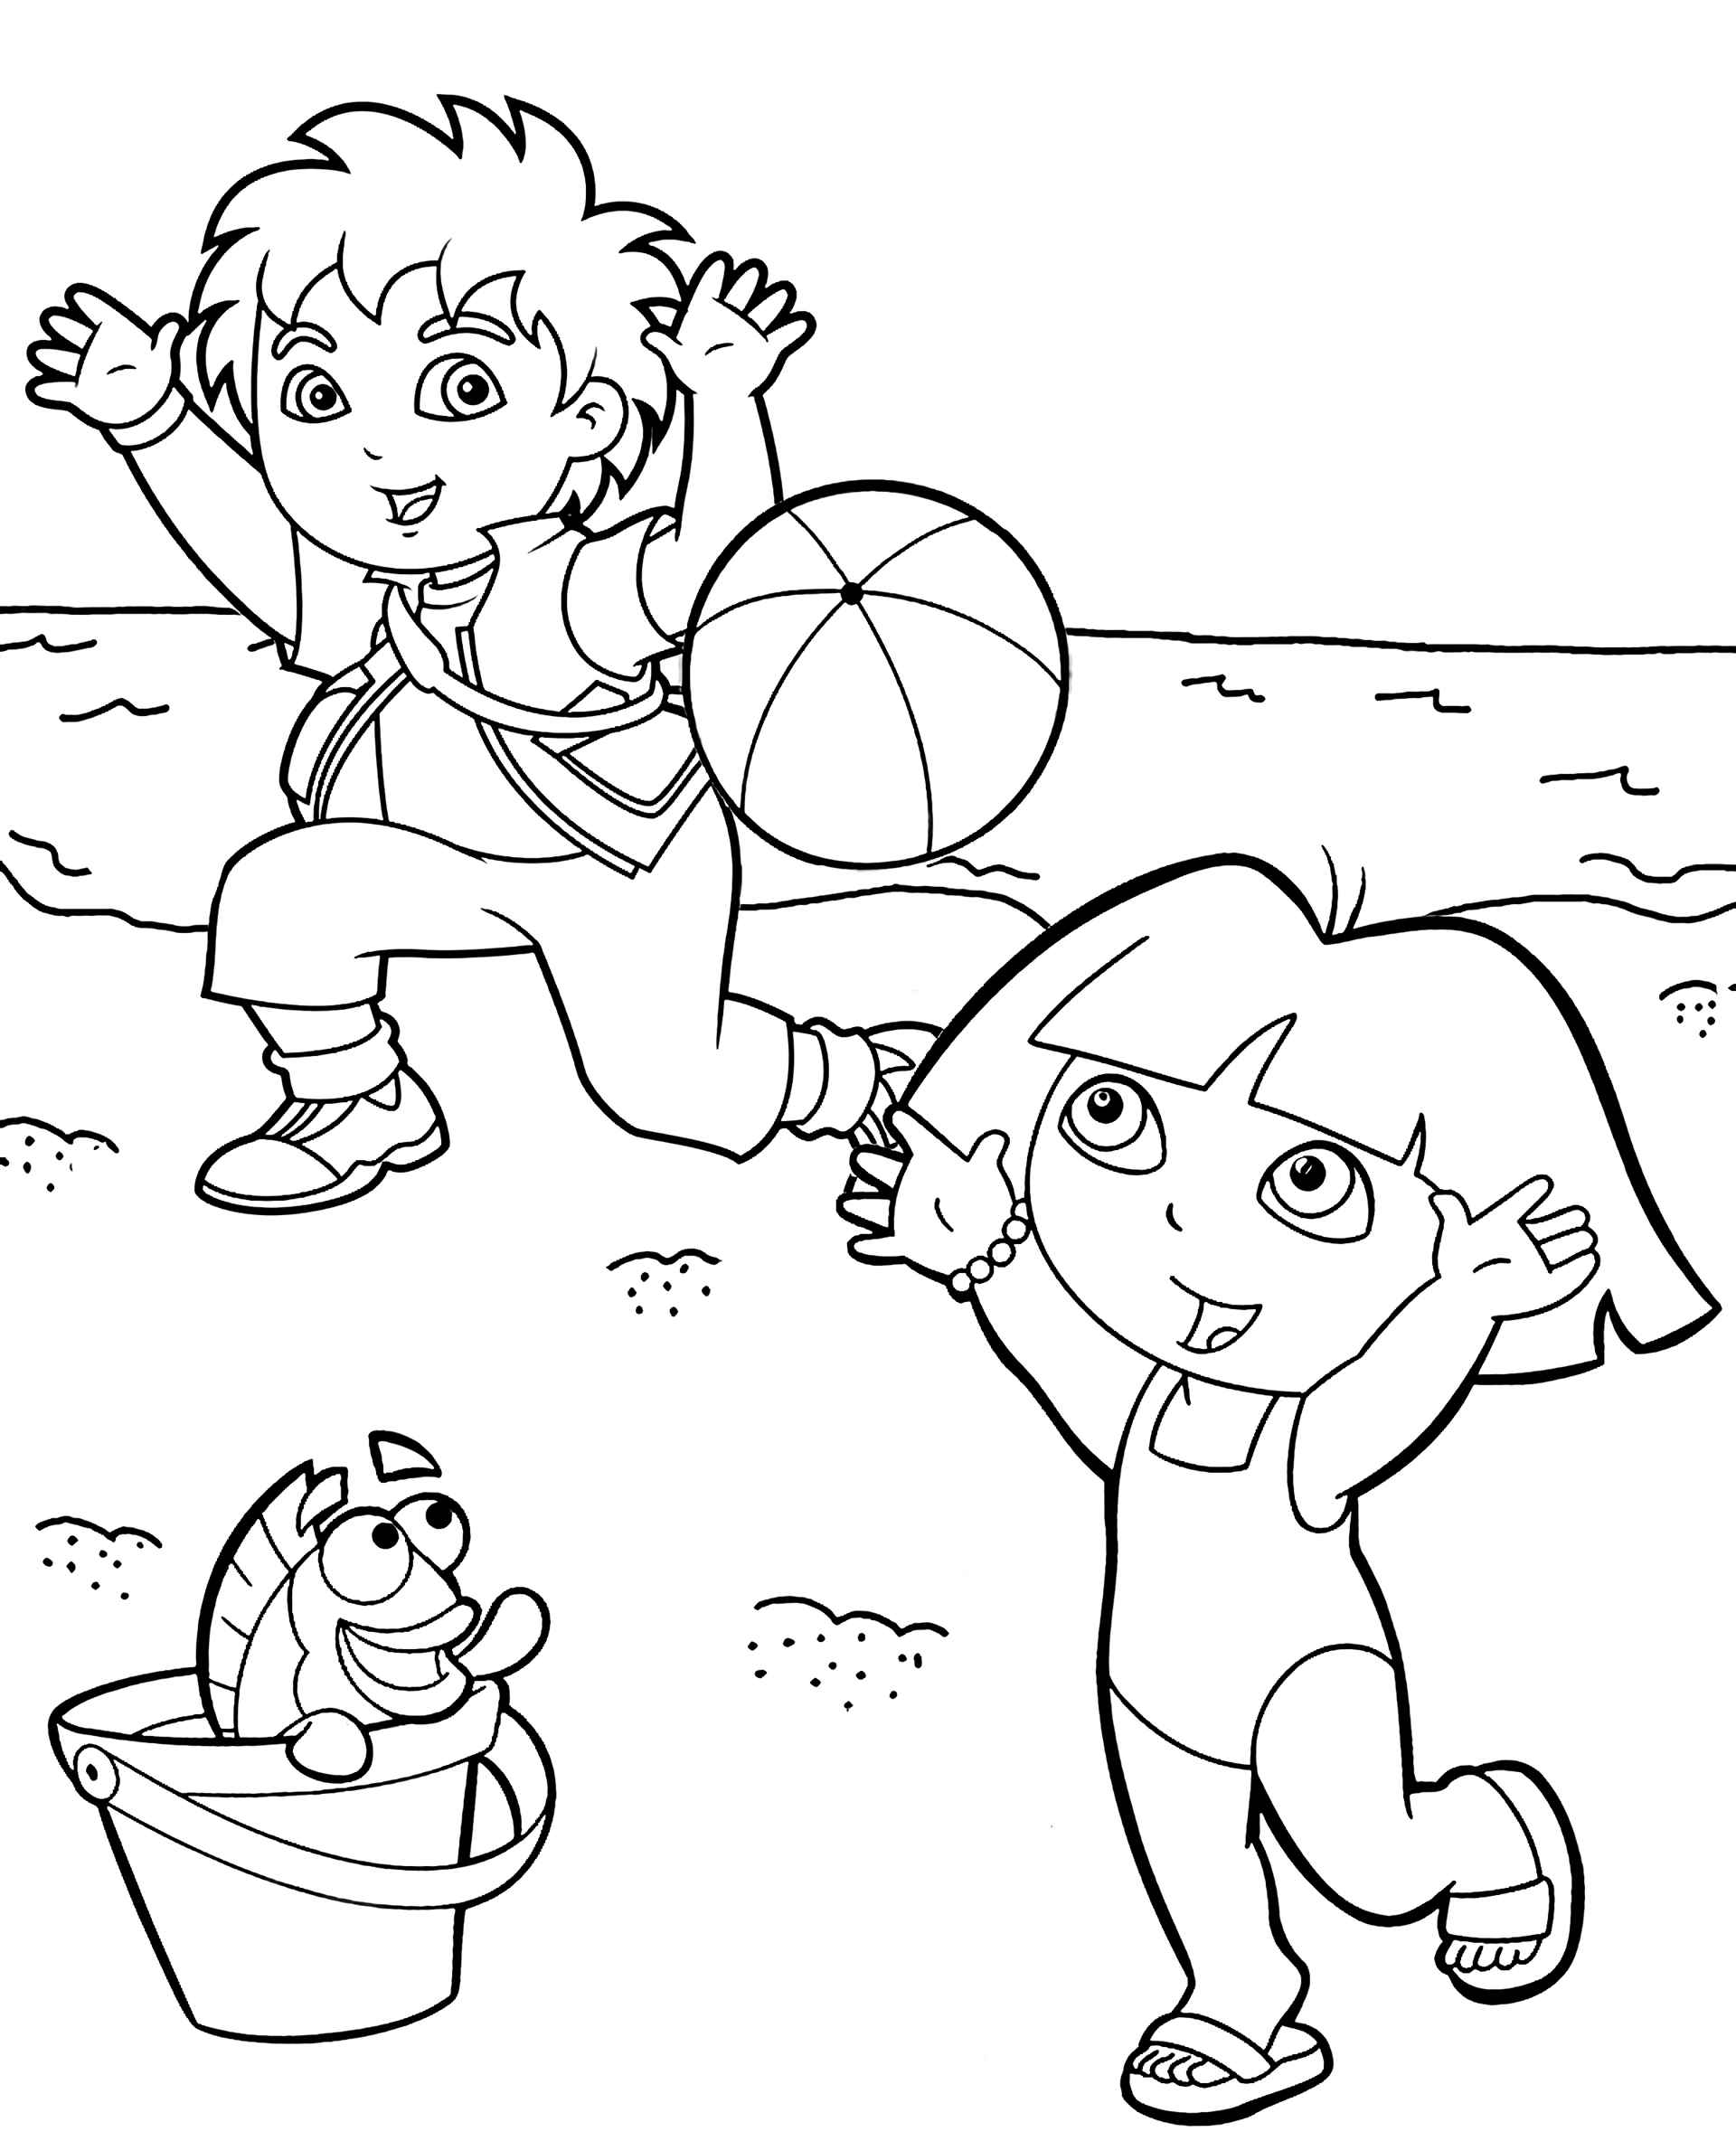 Marvelous diego coloring book